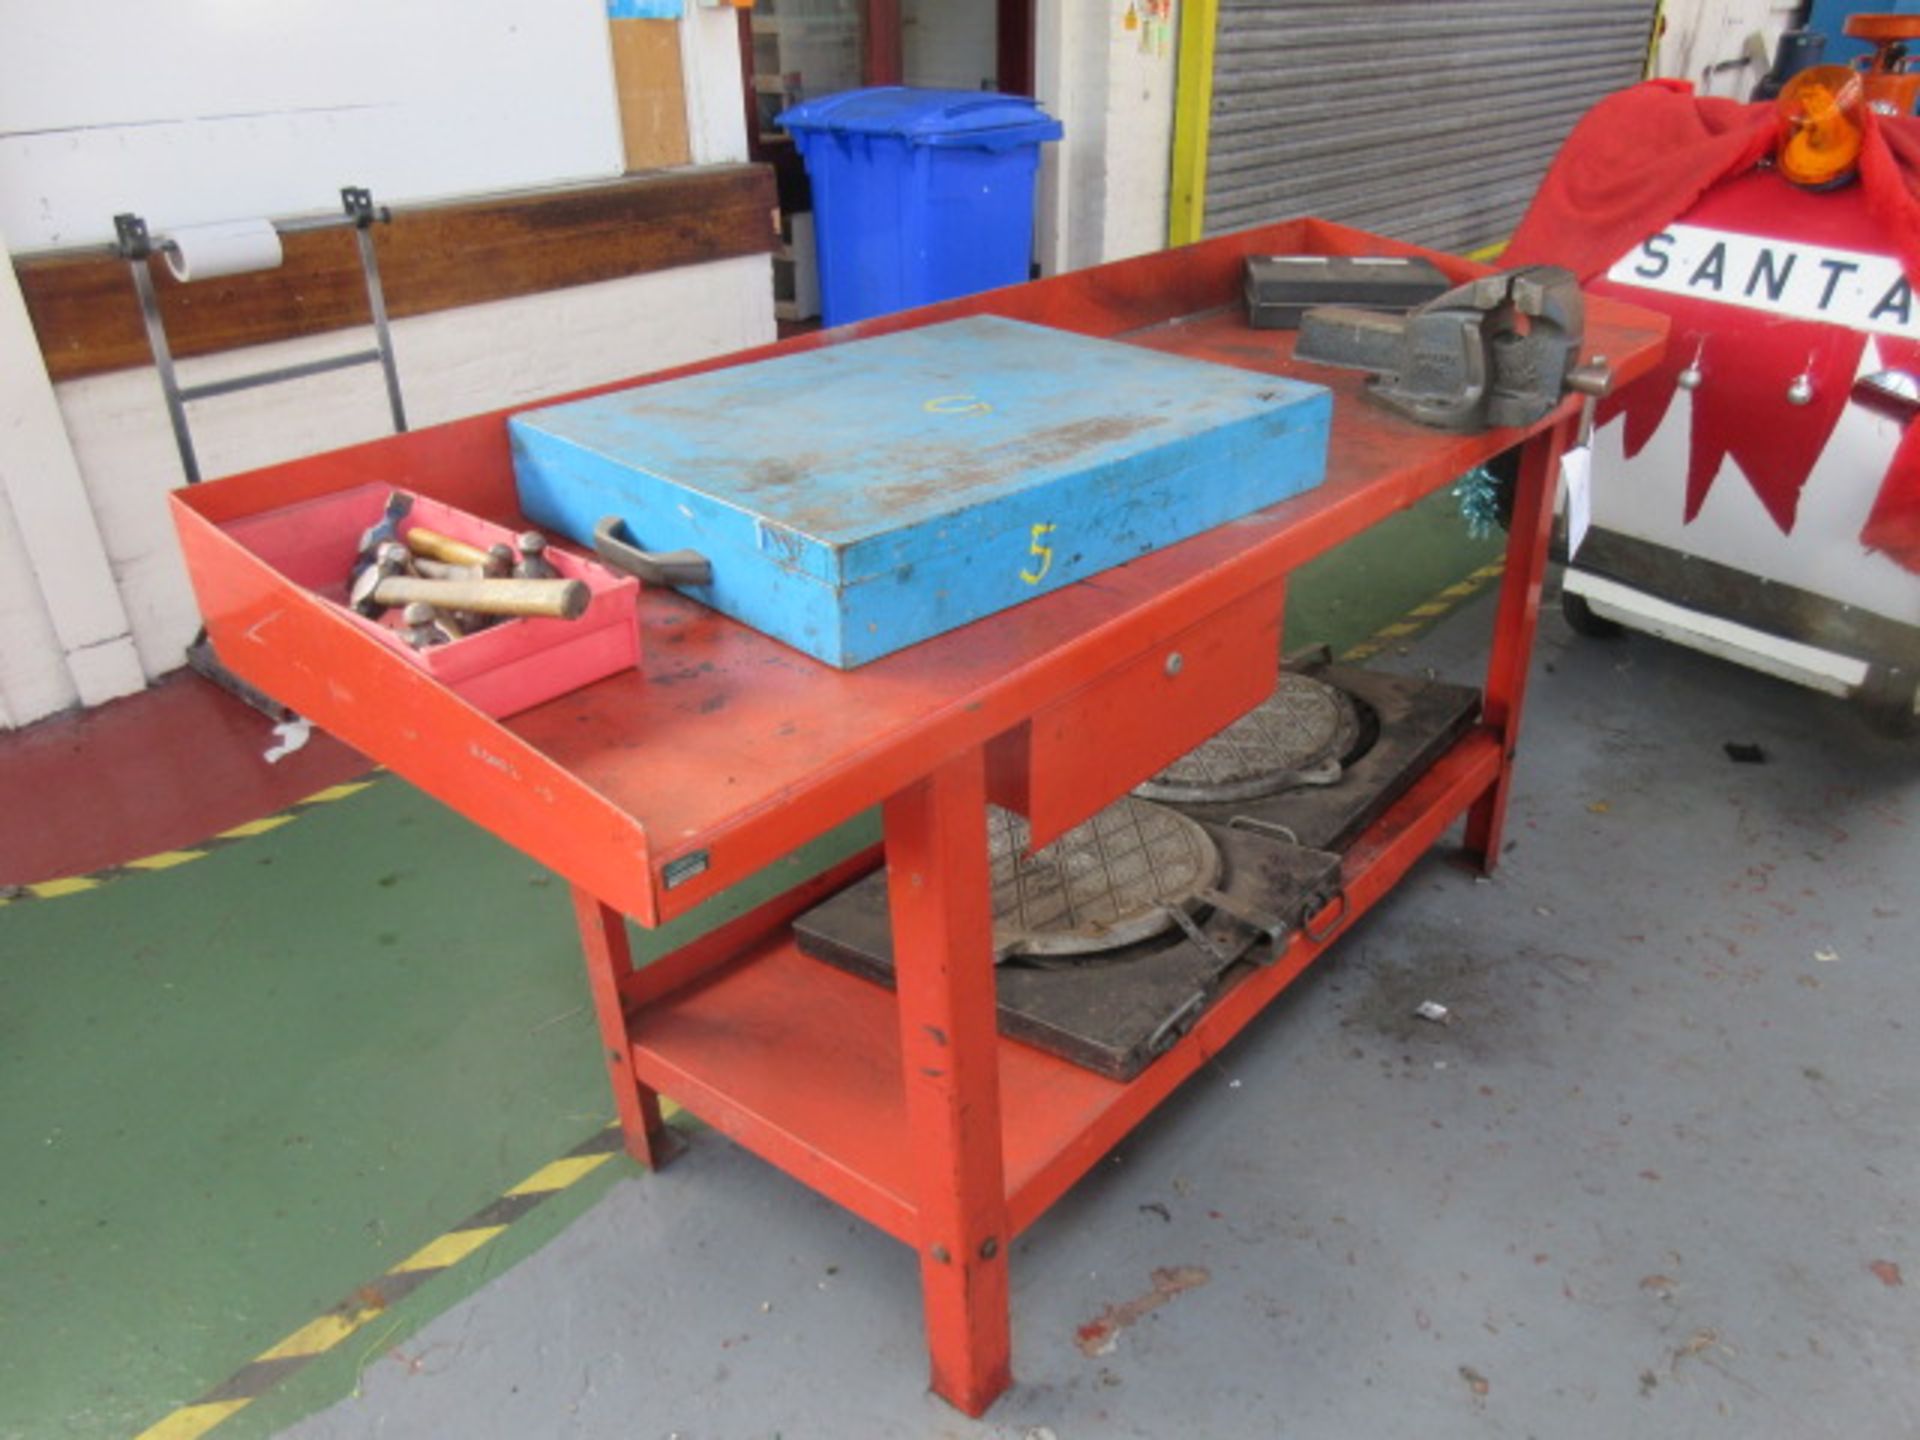 79"" x 26"" steel work bench with vice & drawer. Contents NOT included. Holehouse Road. Garage